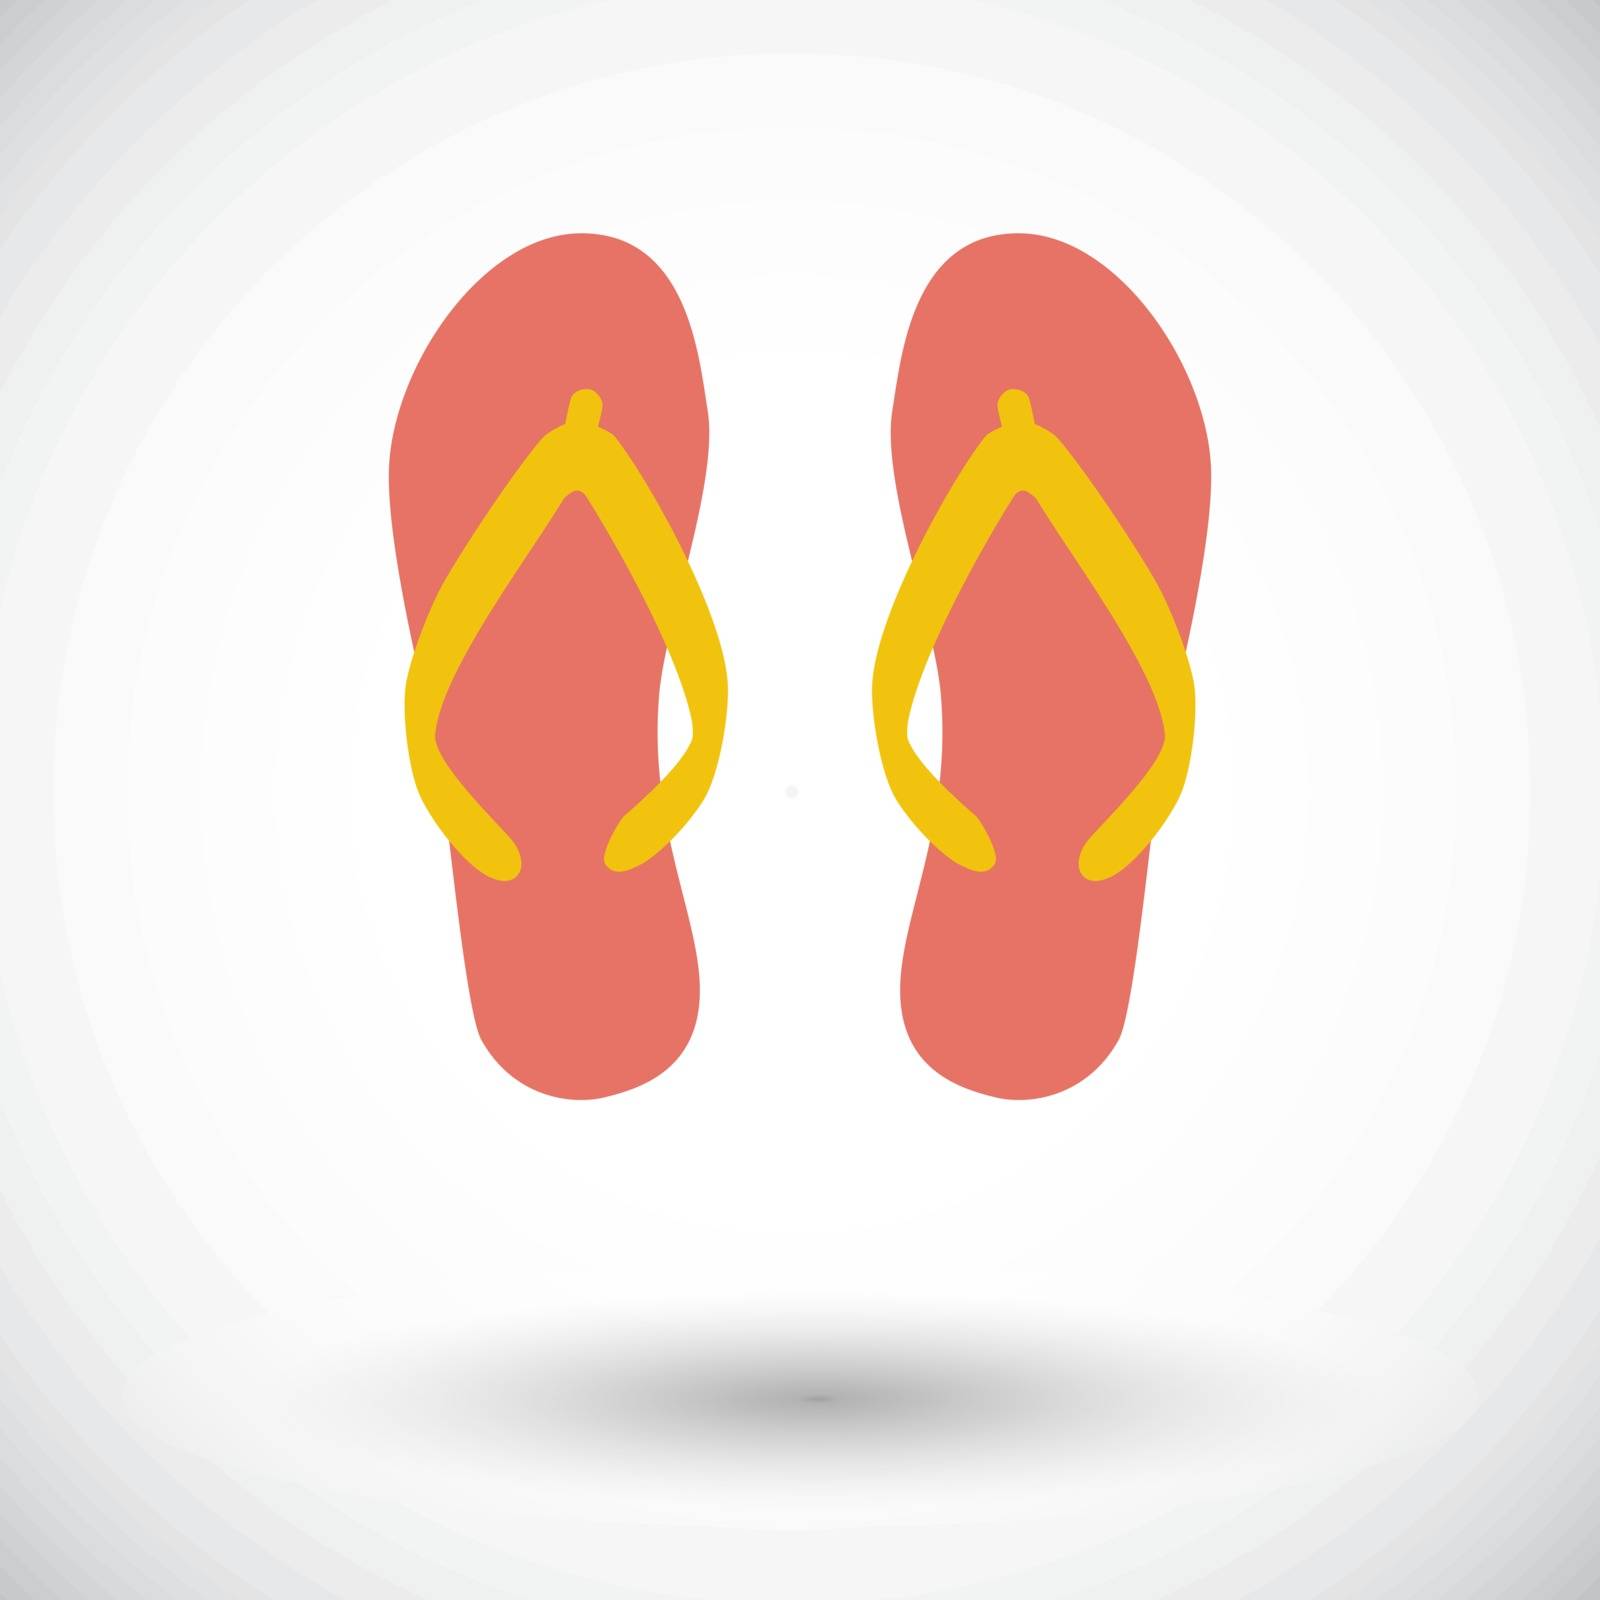 Beach slippers. Single flat icon on white background. Vector illustration.